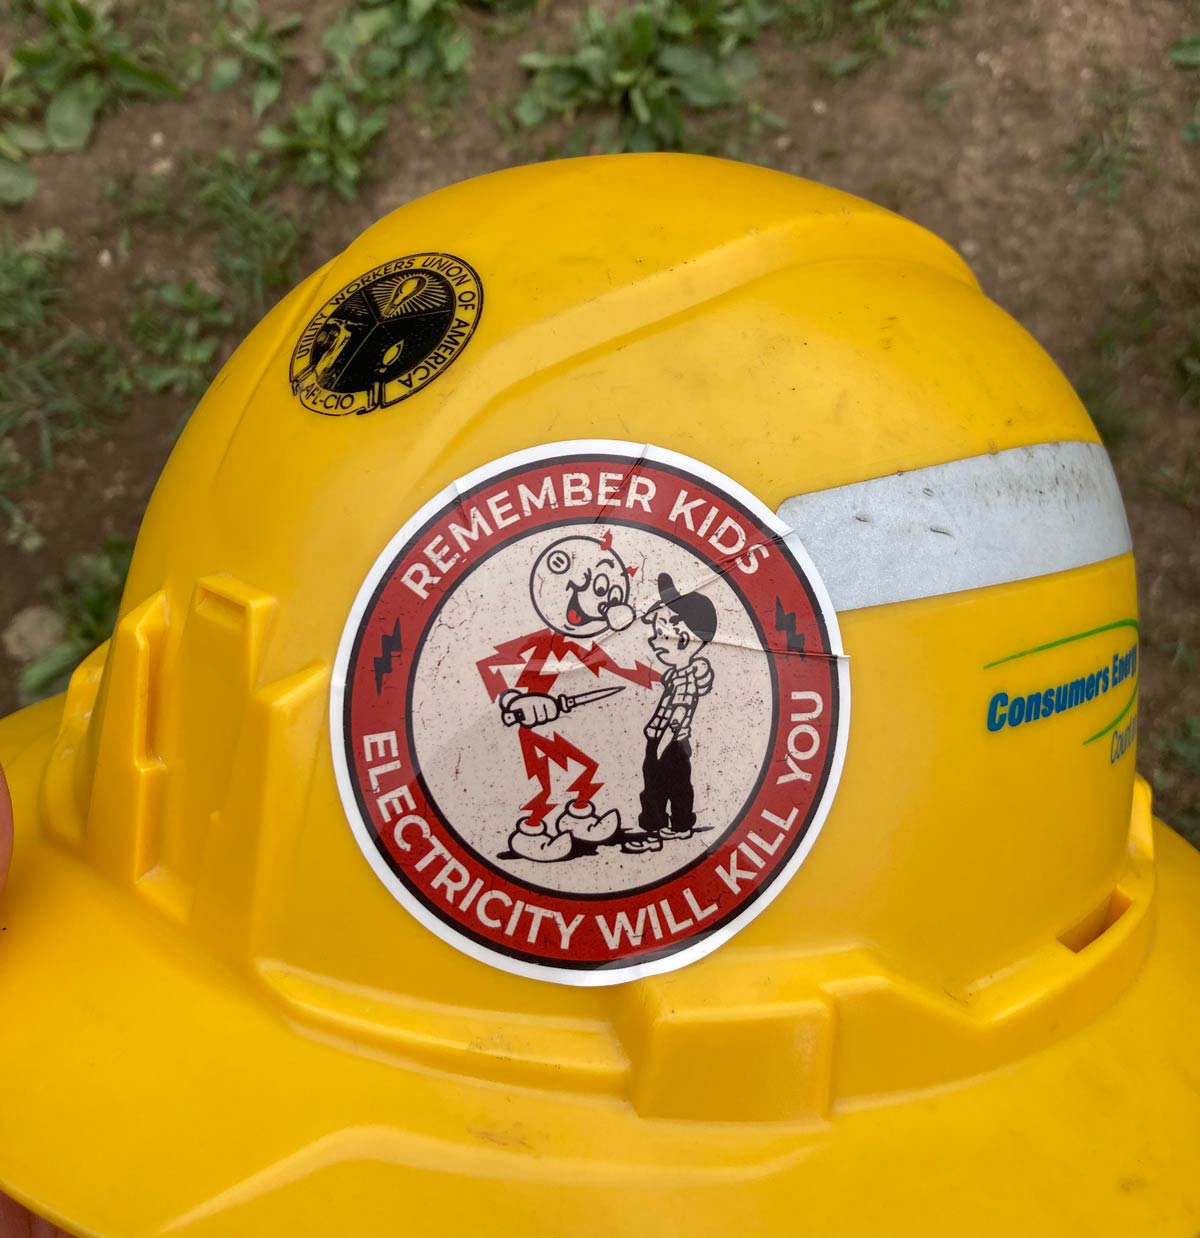 My buddy who’s a lineman just sent me a pic of his hard hat